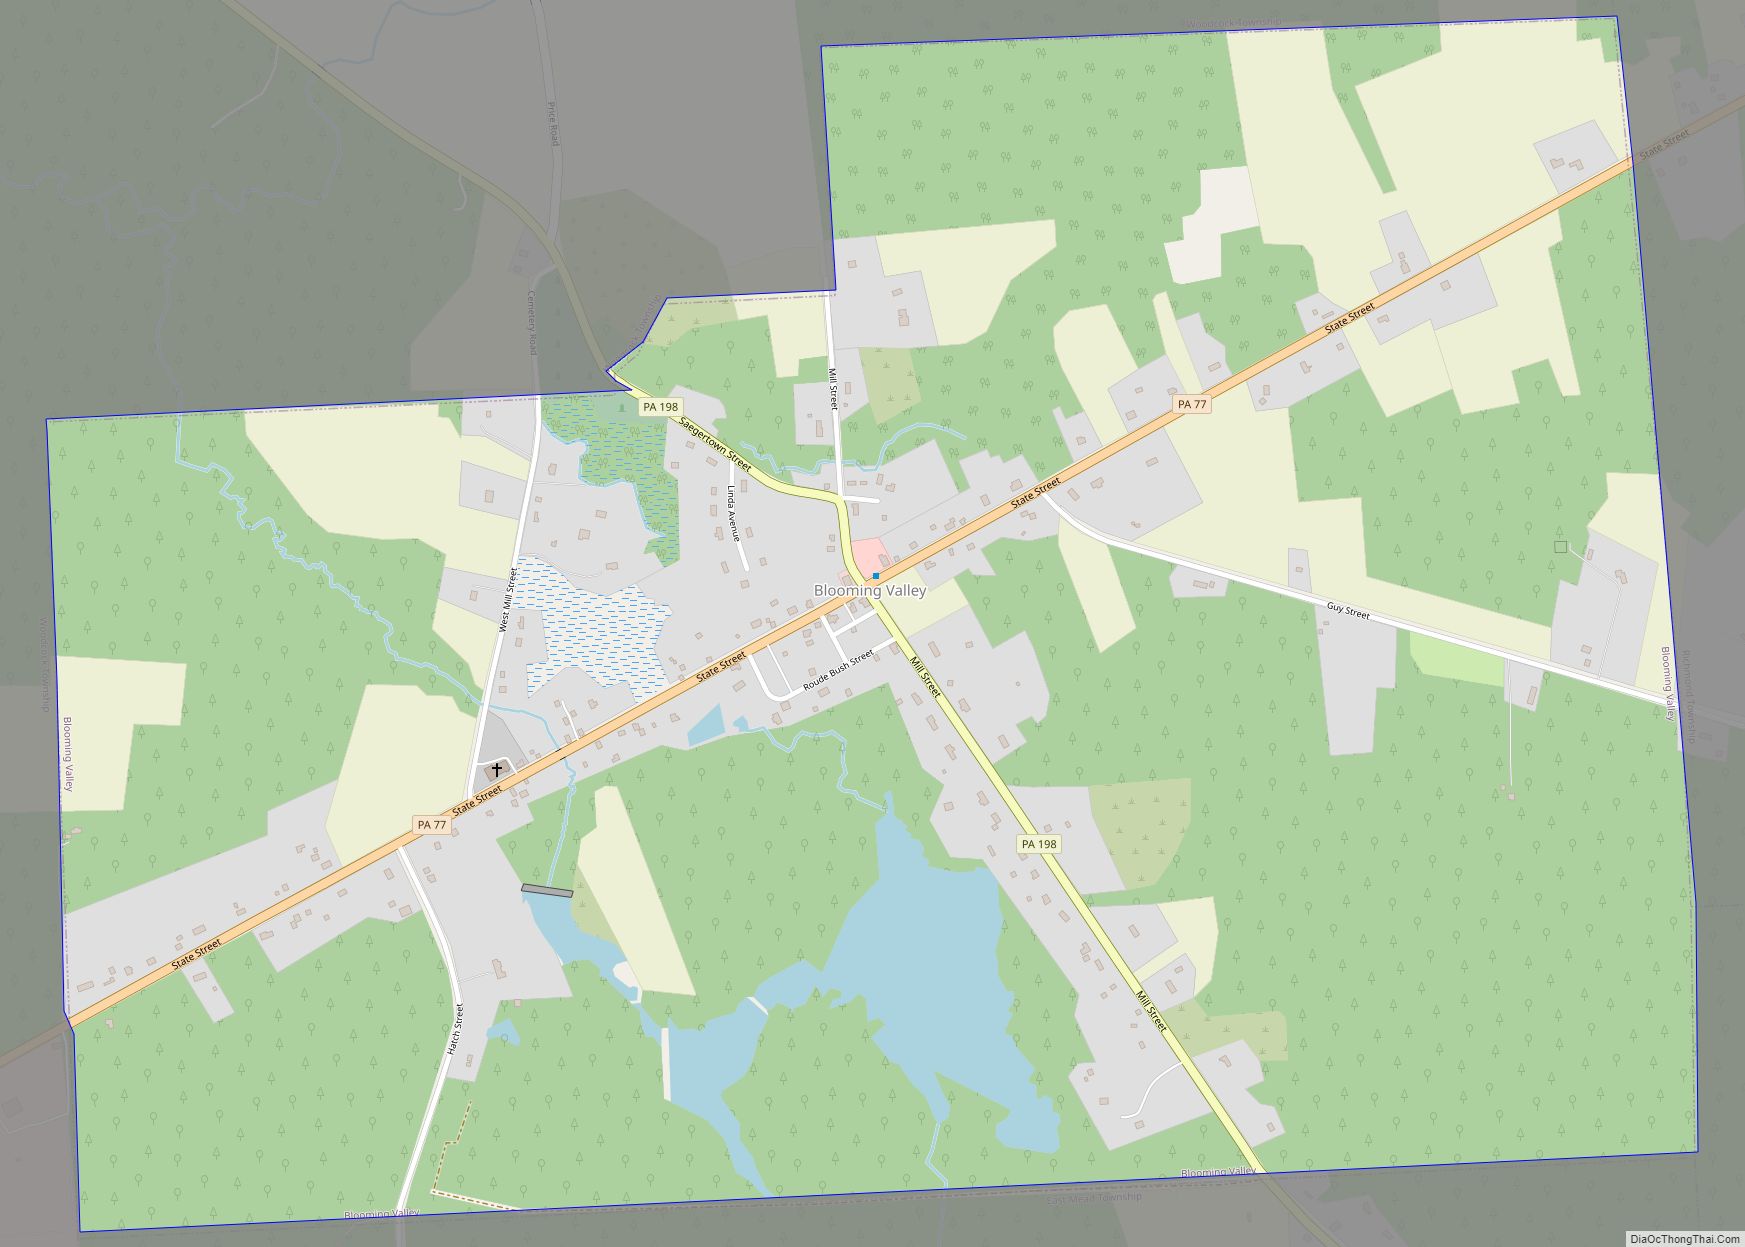 Map of Blooming Valley borough